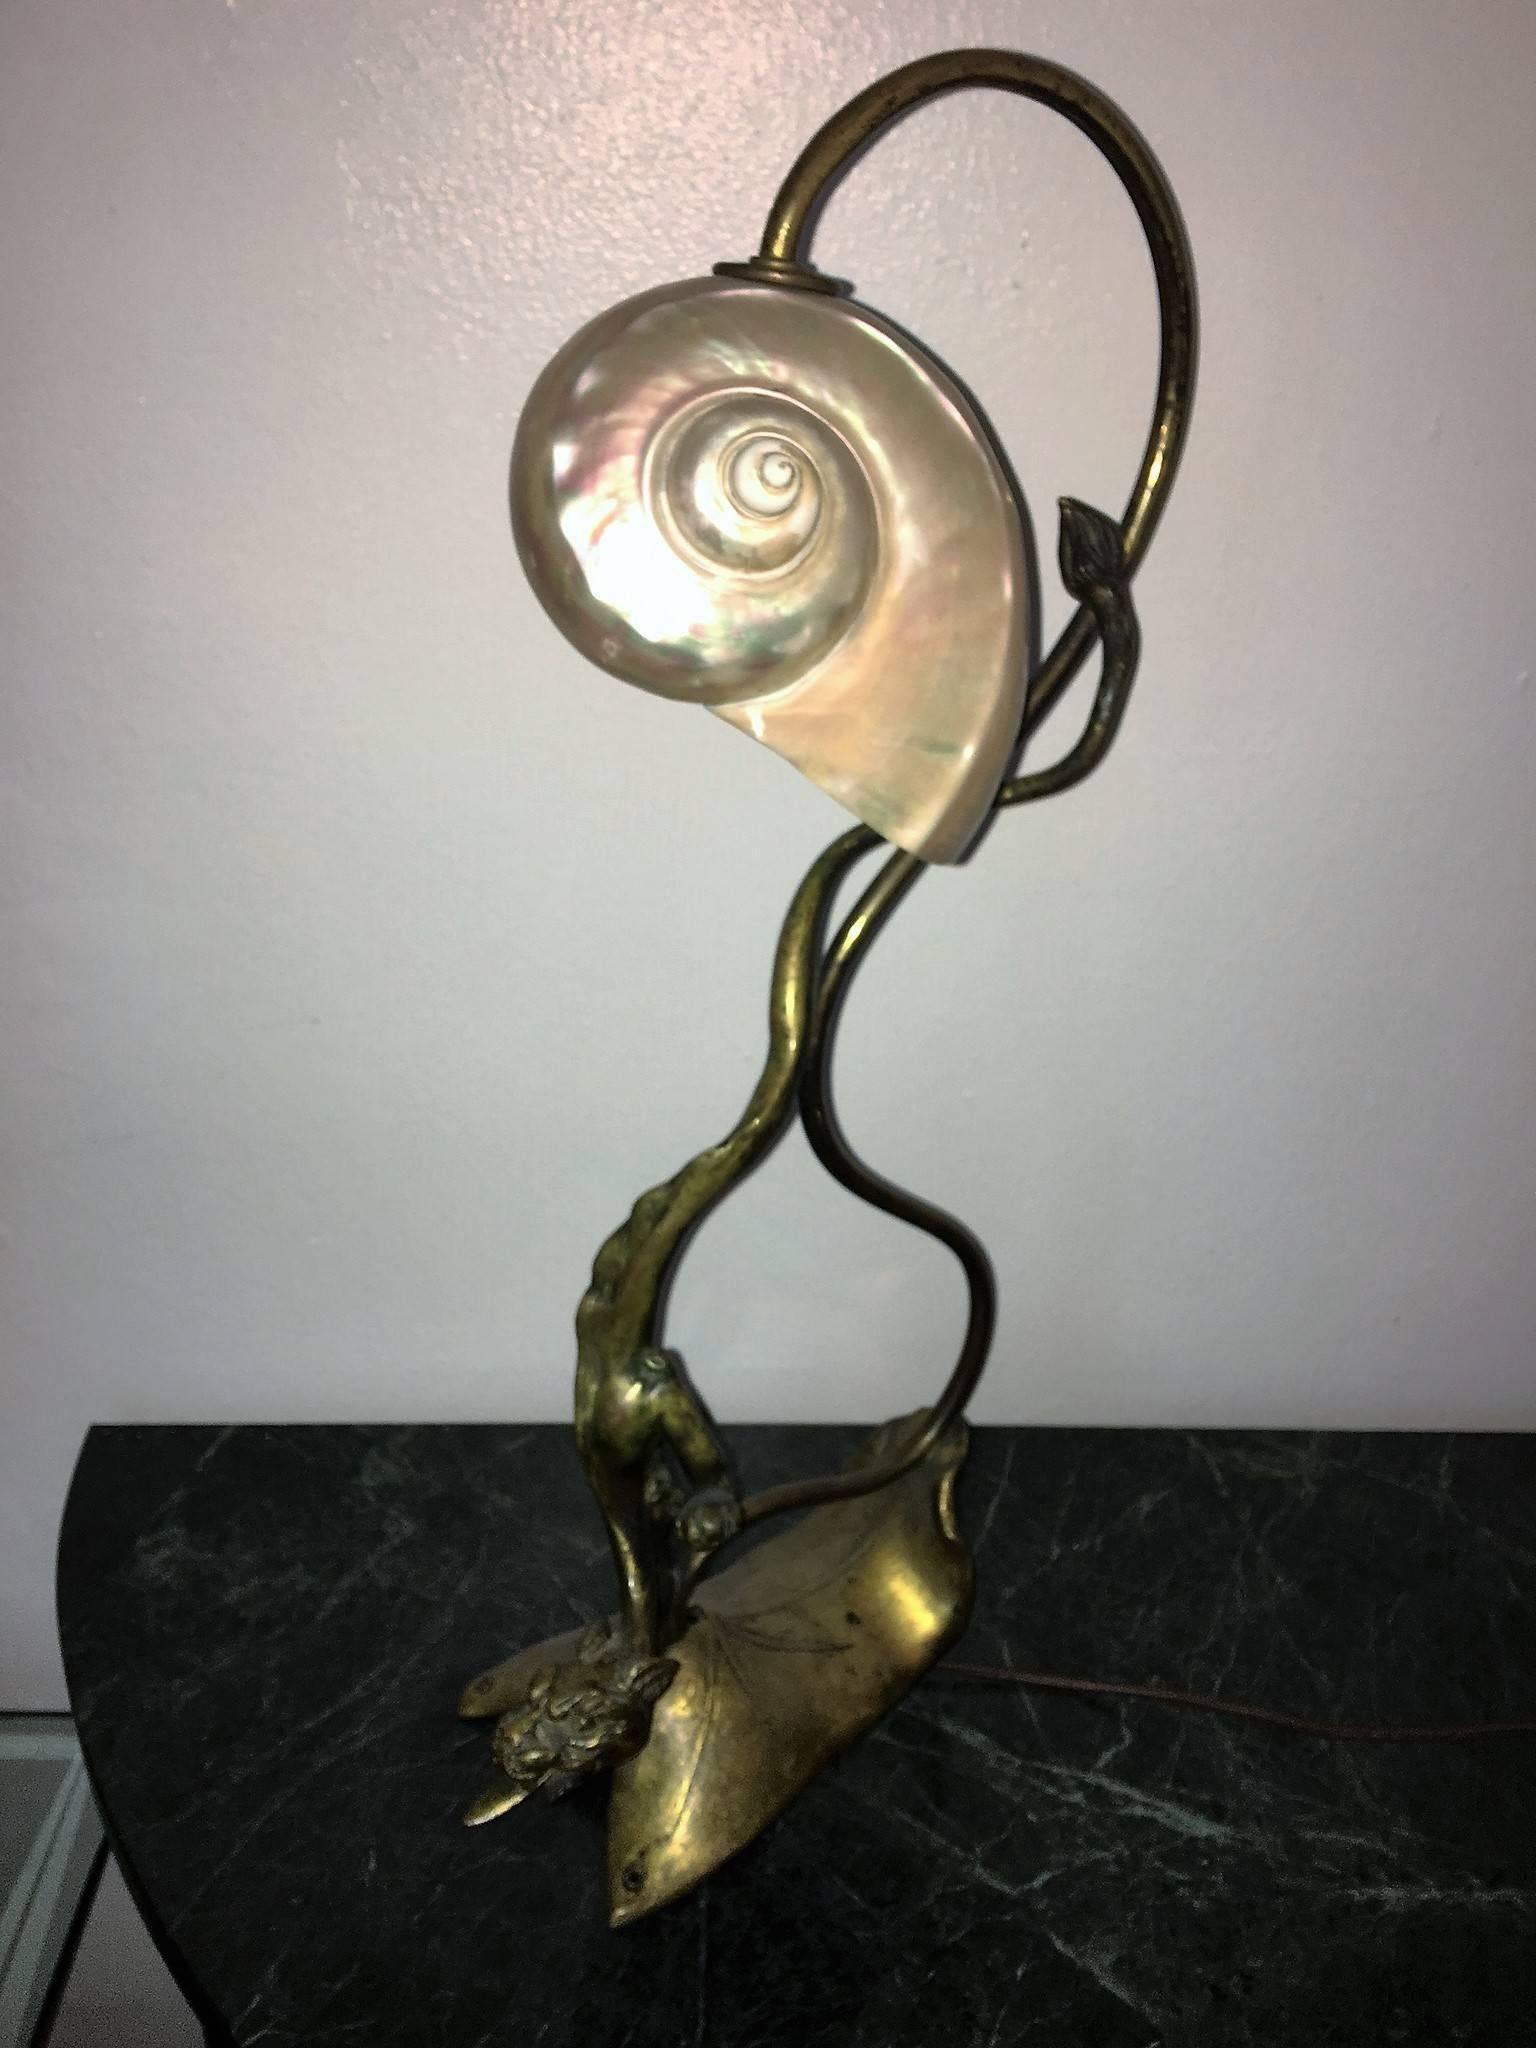 Ethereal sensuous design bronze descending dragonesque panther on stylized tree lamp. Done in the 1900s-1920s this period Art Nouveau lamp is a beautiful night light that can be an accent in your bedroom or desk. Fitted with a candelabra size light